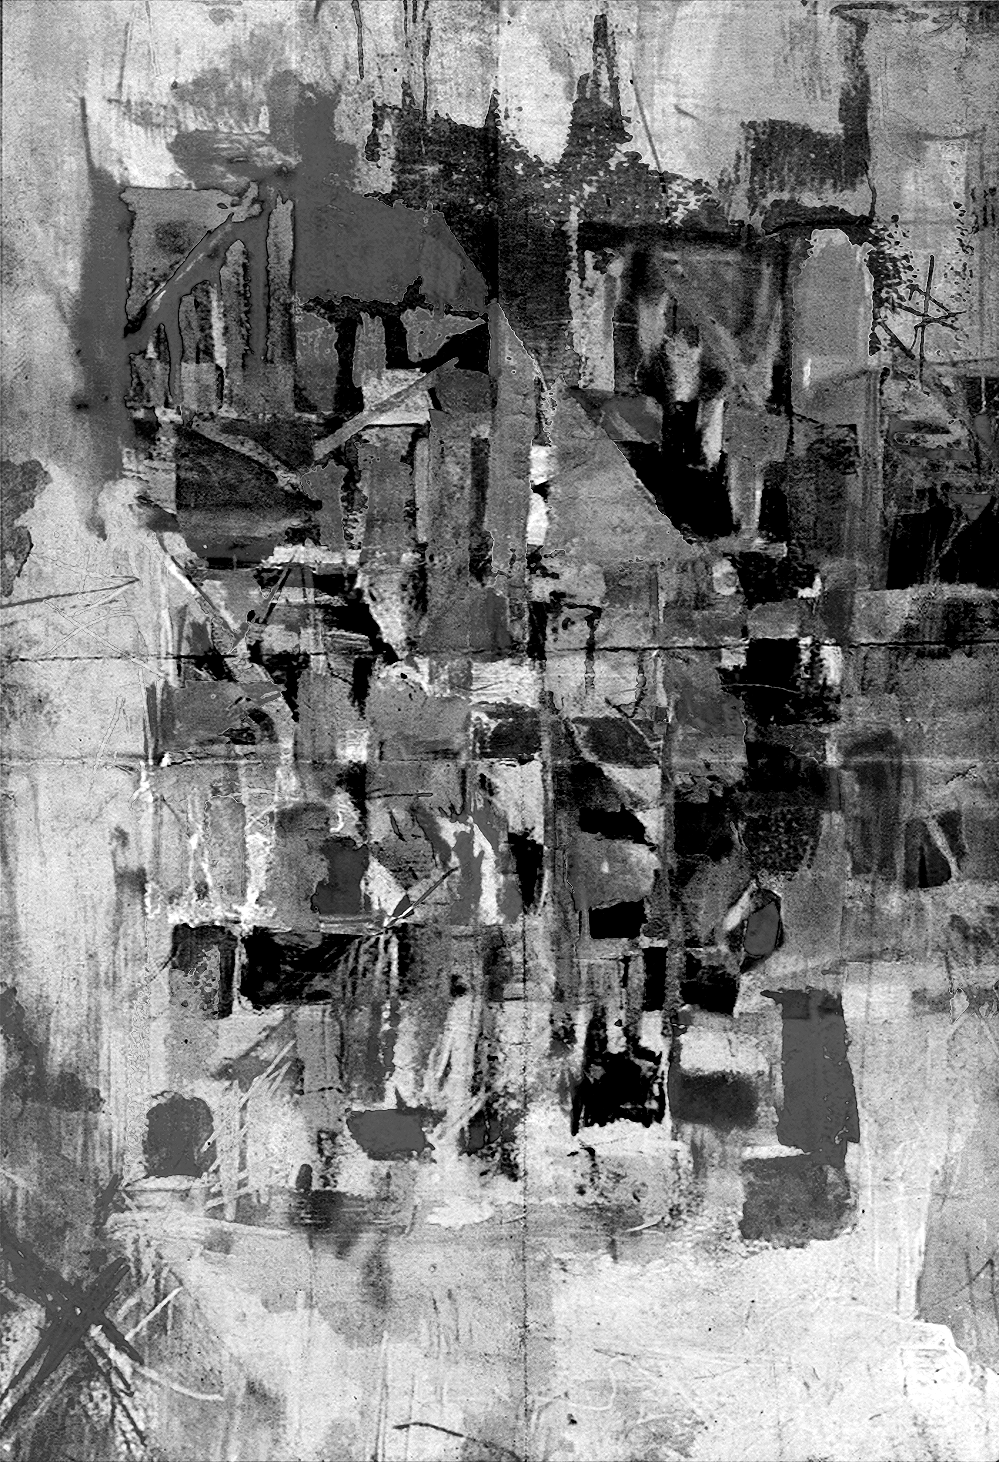 "It is a ghost of an image, a preview, a thumbnail… squeezed through slow digital connections, compressed, reproduced, ripped, remixed, as well as copied and pasted into other channels of distribution.”—Hito SteyerlMade with noise, code, scrap paper, tea, tape, discarded electronics, graphite and light projection. Inspired by artist friends in the highly networked practice of generative art, as well as Hito Steyerl's seminal defense of the poor image, GEIST mixes generative, traditional, digital and material processes.An exploration and reconciliation with the strange power of the static thumbnail in web3.An homage to all the poor images no less haunting for their humble resolution that became formative cultural influences for those of us who grew up on the Internet.
Lastly, a non-literal labyrinth linking past and upcoming long form generative art projects - GEIST gives rise to keys for those willing to explore a non-linear future.